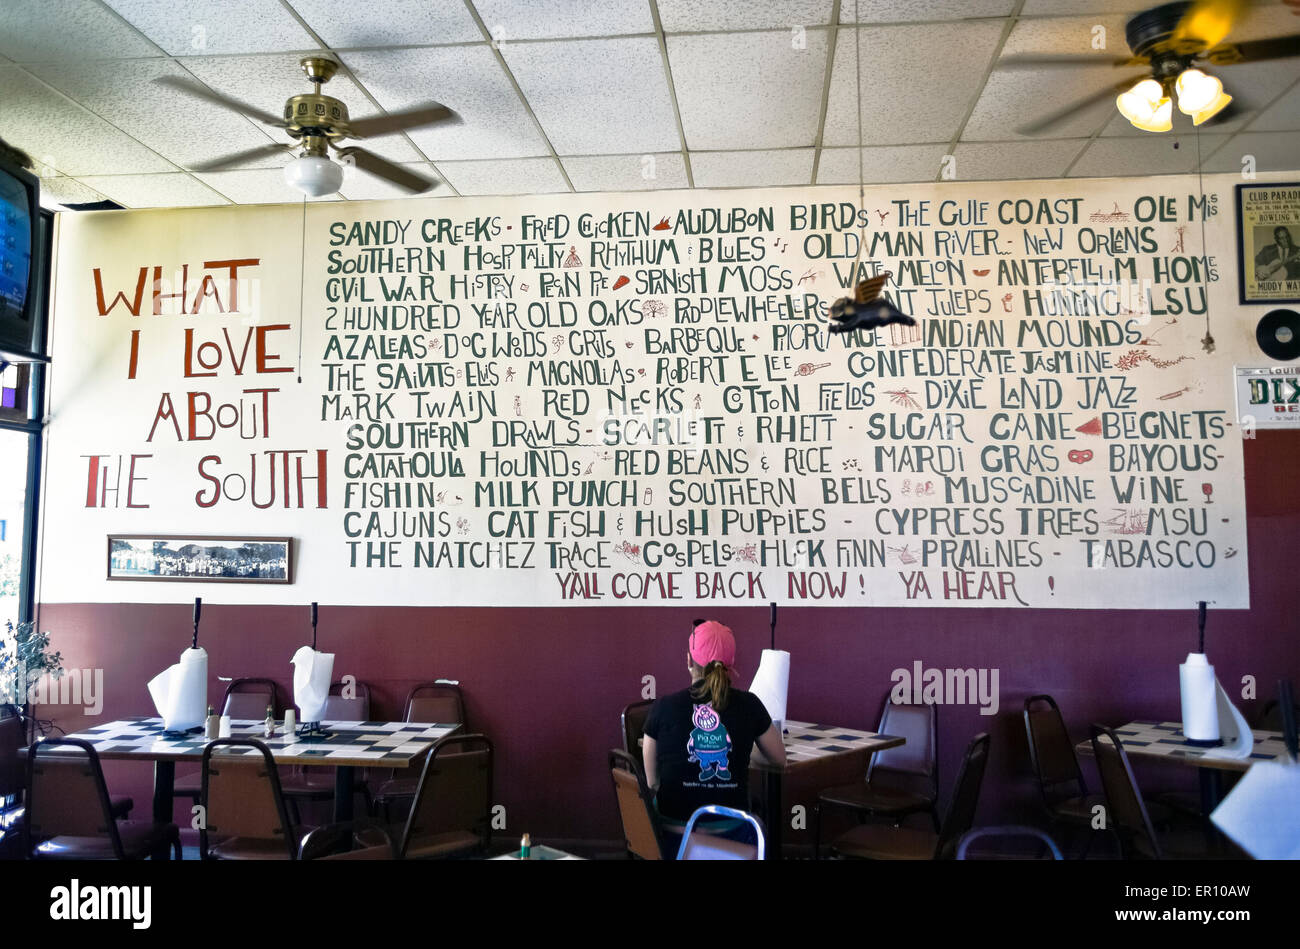 A list of attractions of the Old South are painted on a wall at the Pig Out Inn, a casual dining spot known for its BBQ in Natchez, Mississippi, USA. Stock Photo